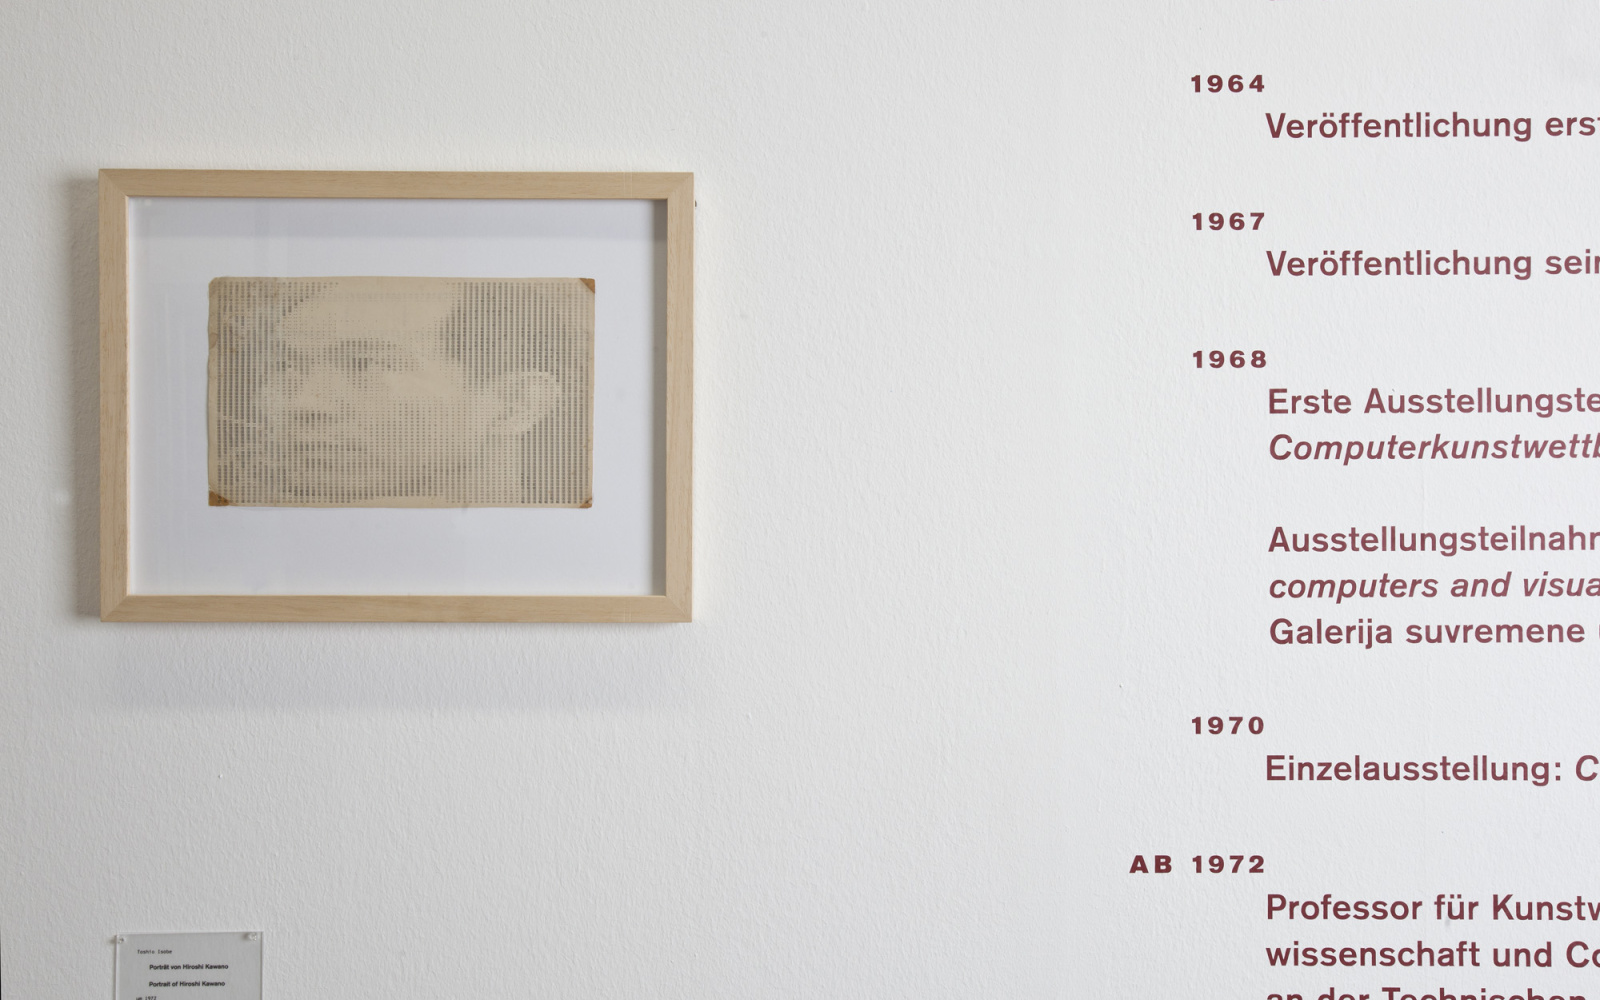 A white wall: on the left, a portrait of Hiroshi Kawano left, on the right, his resume